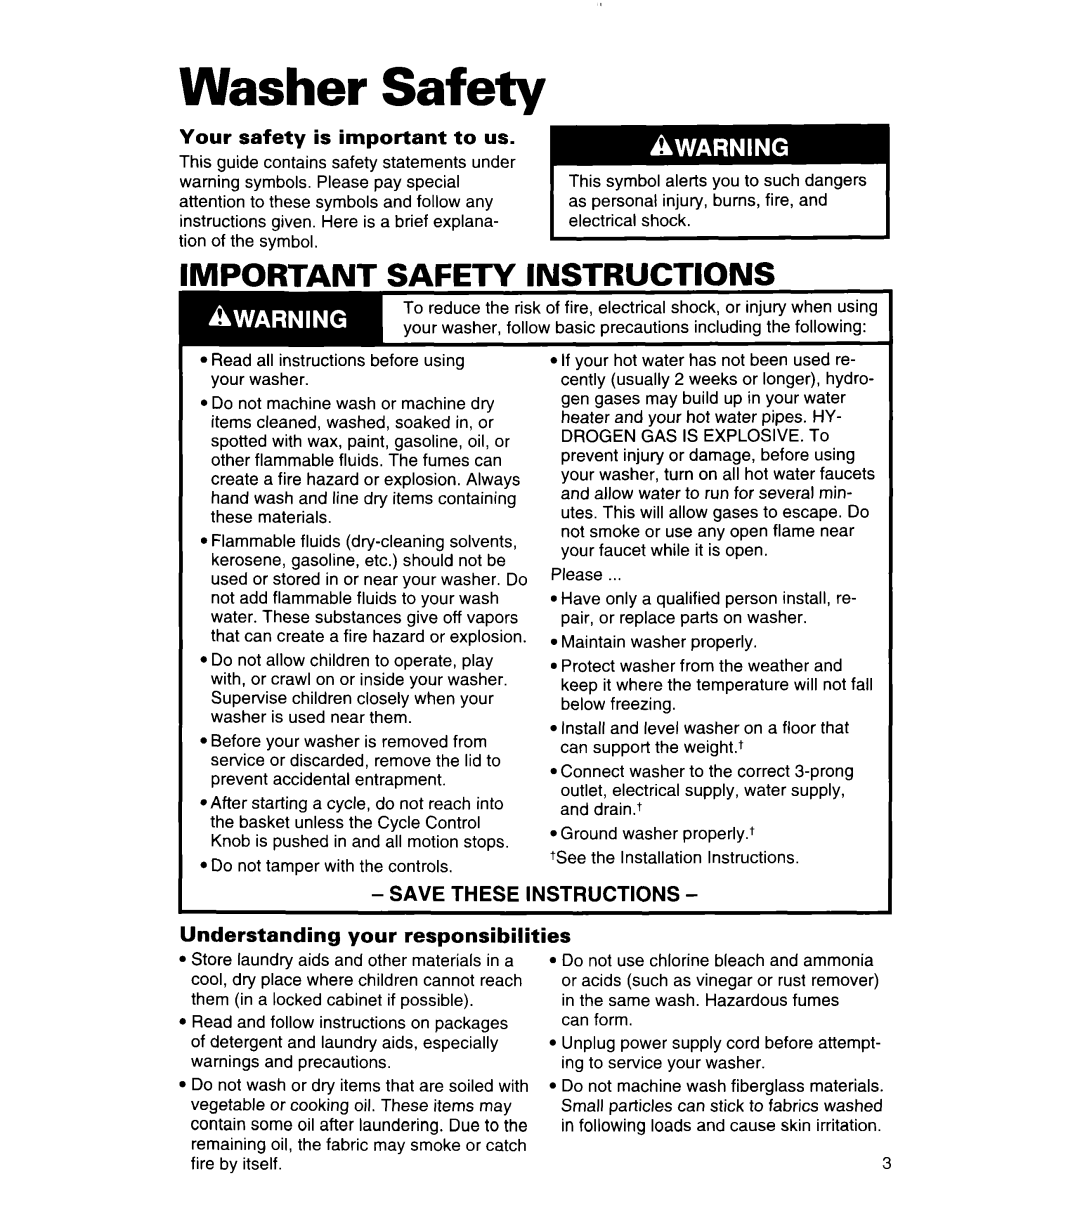 Whirlpool 3360464 Washer Safety, Important Safety Instructions, Your safety is important to us, Save These Instructions 